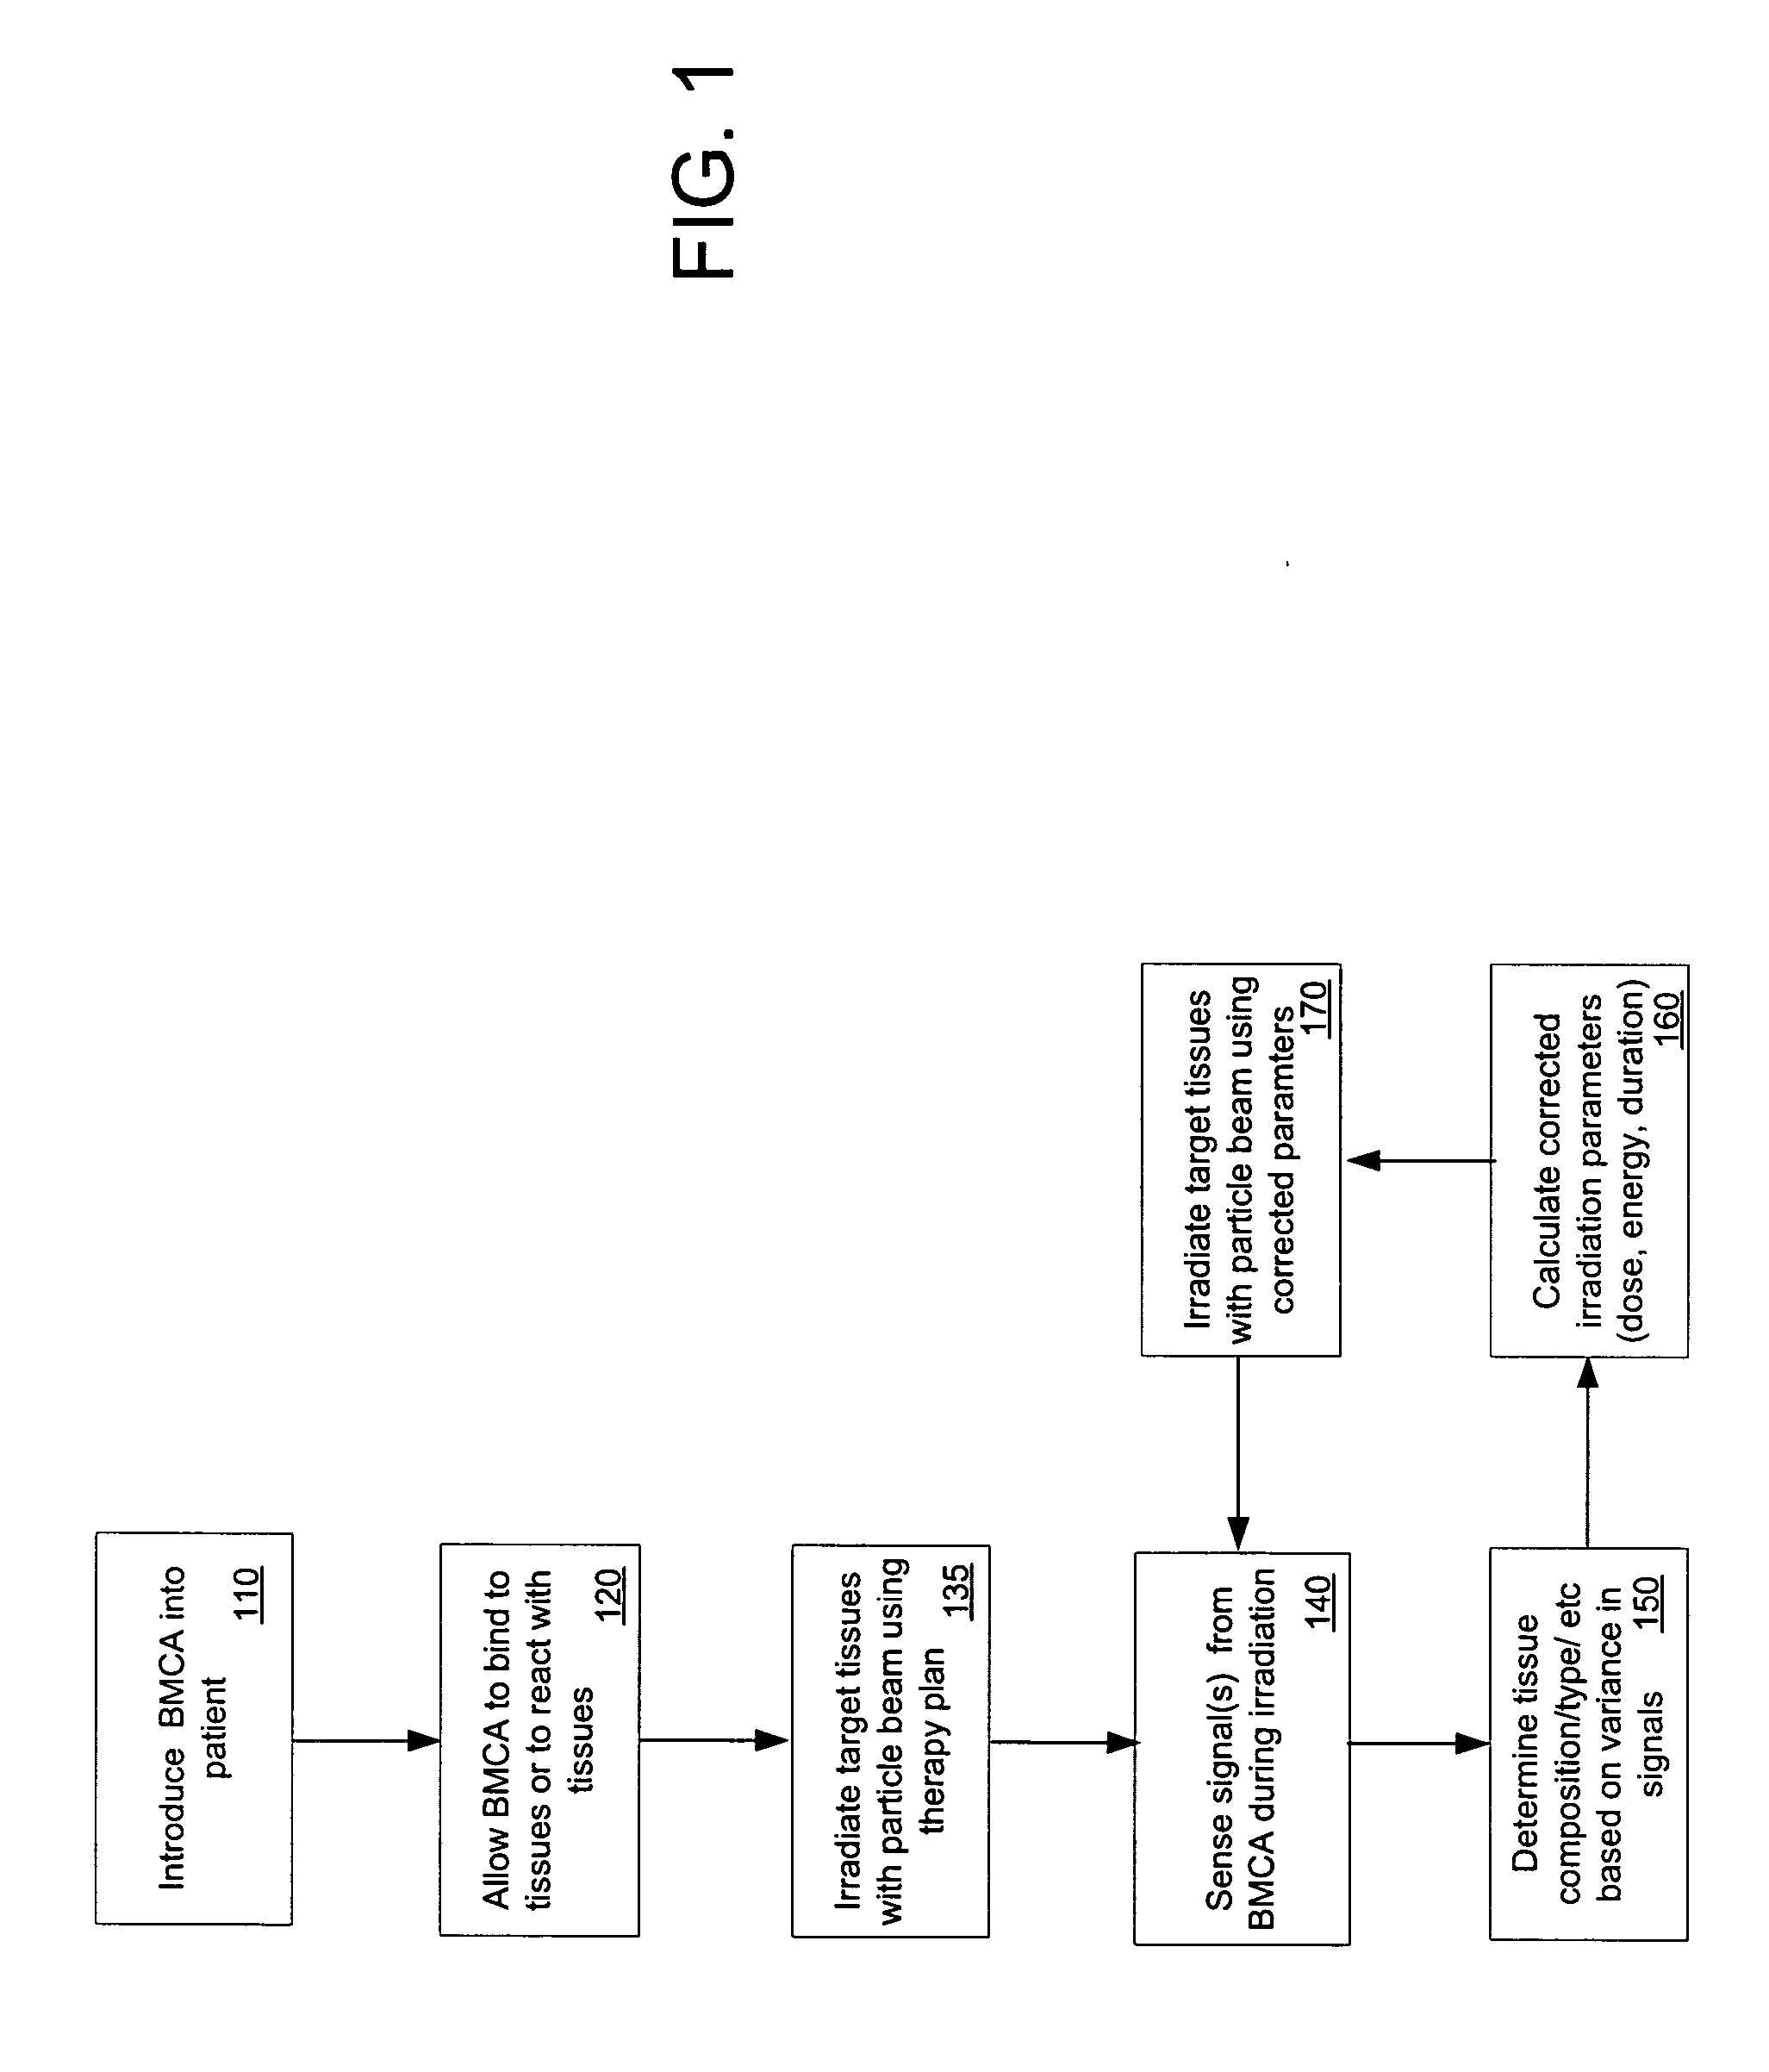 Biomolecular contrast agents with multiple signal variance for therapy planning and control in radiation therapy with proton or ion beams